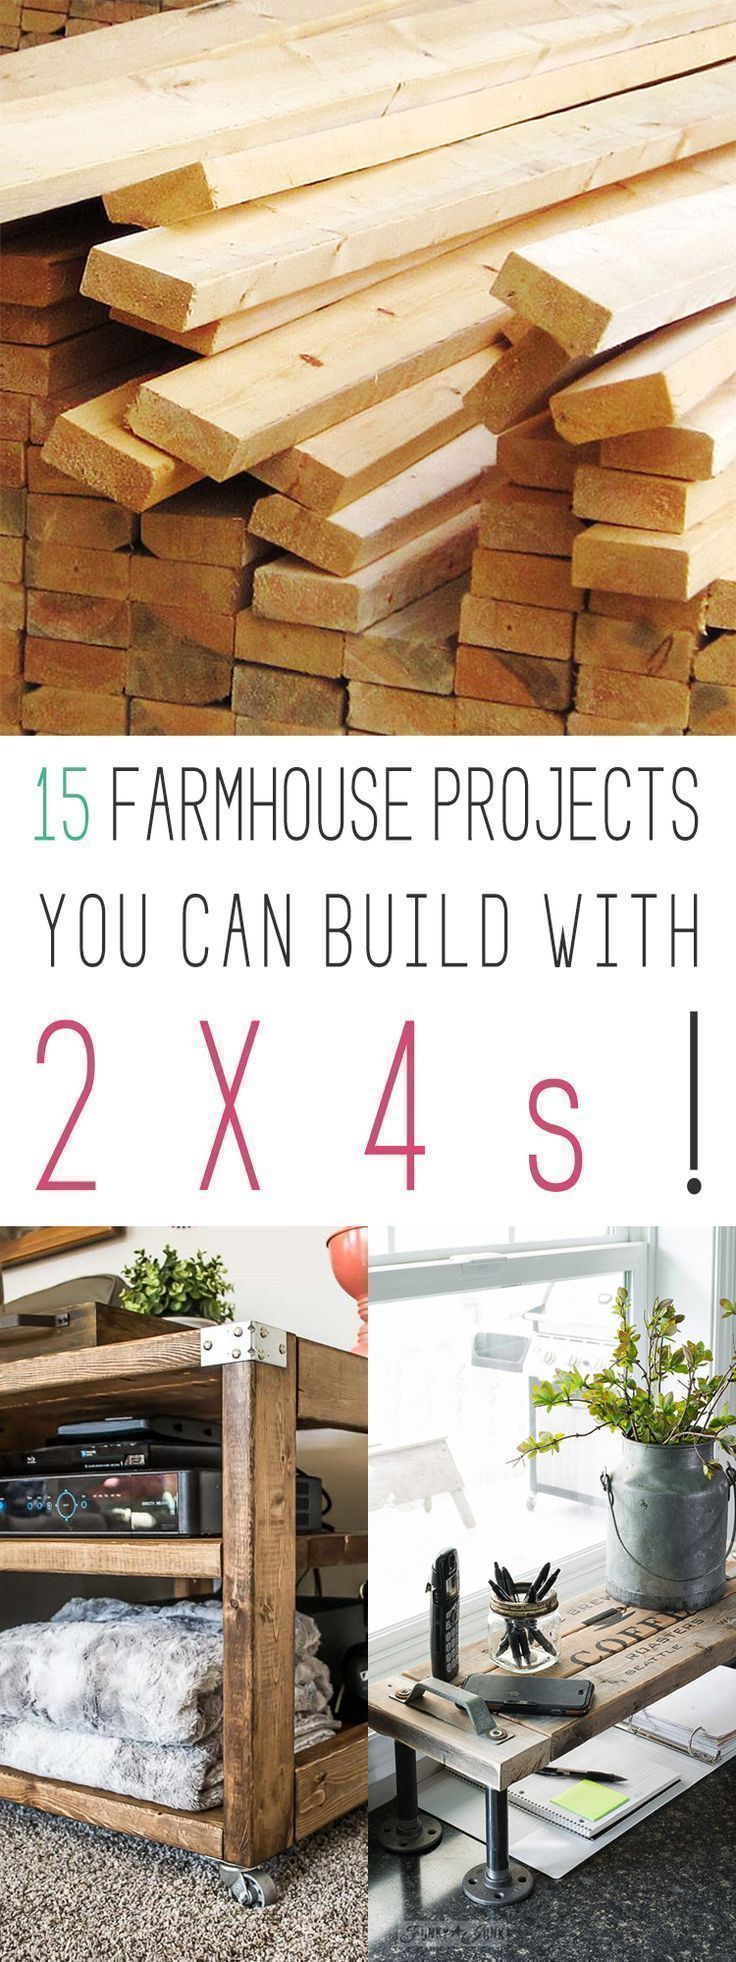 15 Farmhouse Projects You Can Build With 2X4s - The Cottage Market - 15 Farmhouse Projects You Can Build With 2X4s - The Cottage Market -   18 house diy Projects ideas